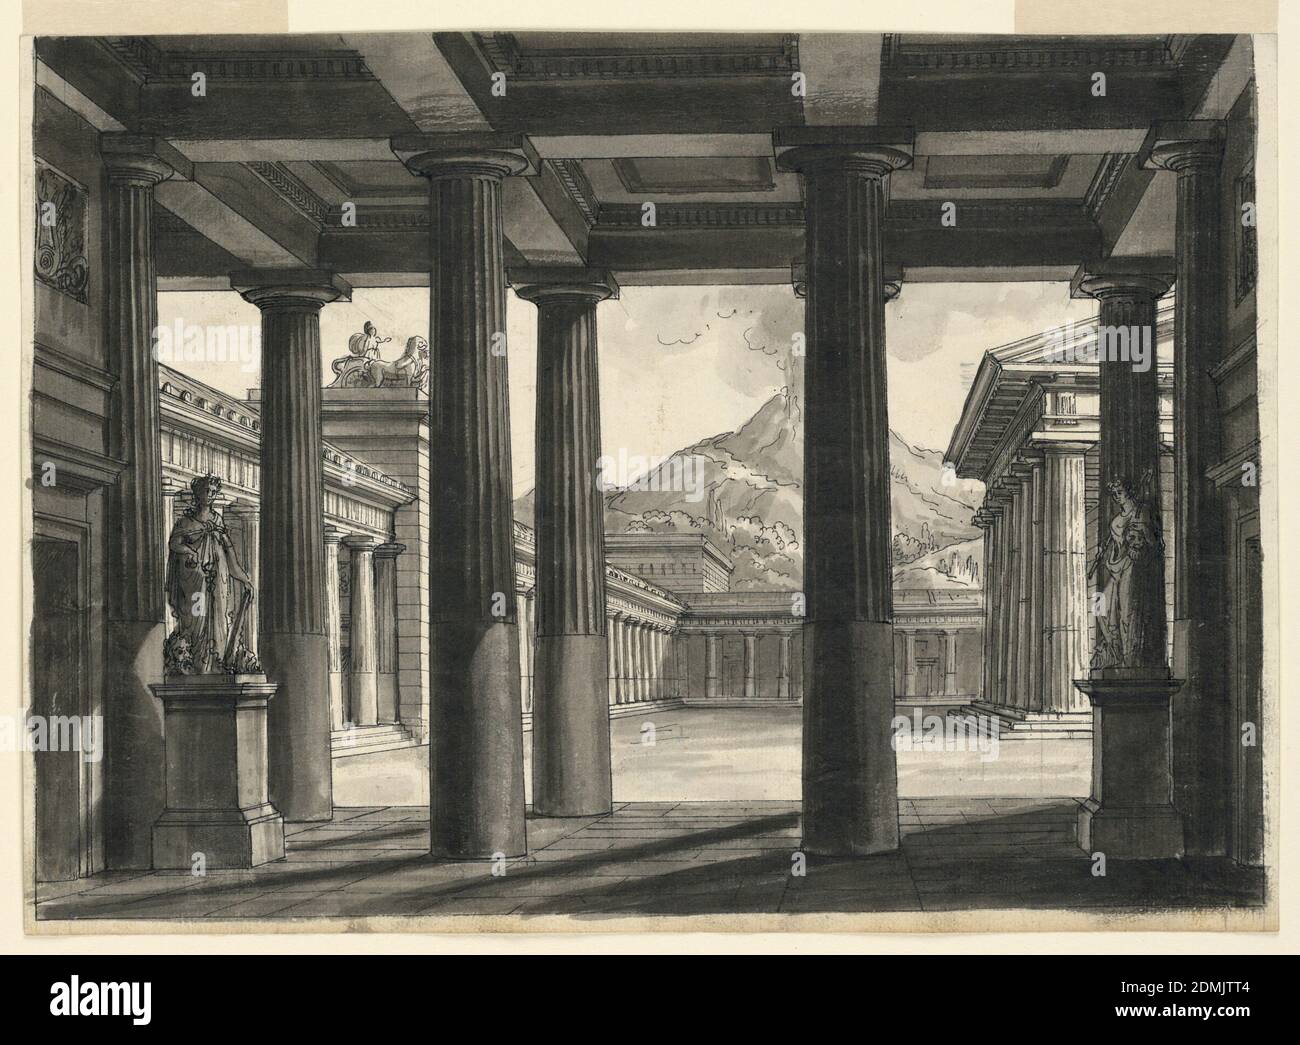 Stage Design for the opera 'L'Ultima giorno di Pompei,' at La Scala, Milan, 1827, Romolo Achille Liverani, Italian, 1809 - 1872, Alessandro Sanquirico, Italian, 1777 - 1849, Pen and black ink, brush and wash on off-white wove paper, Horizontal rectangle. Porticoes around a temple building, in the background an erupting volcano., Italy, early 19th century, theater, Drawing Stock Photo